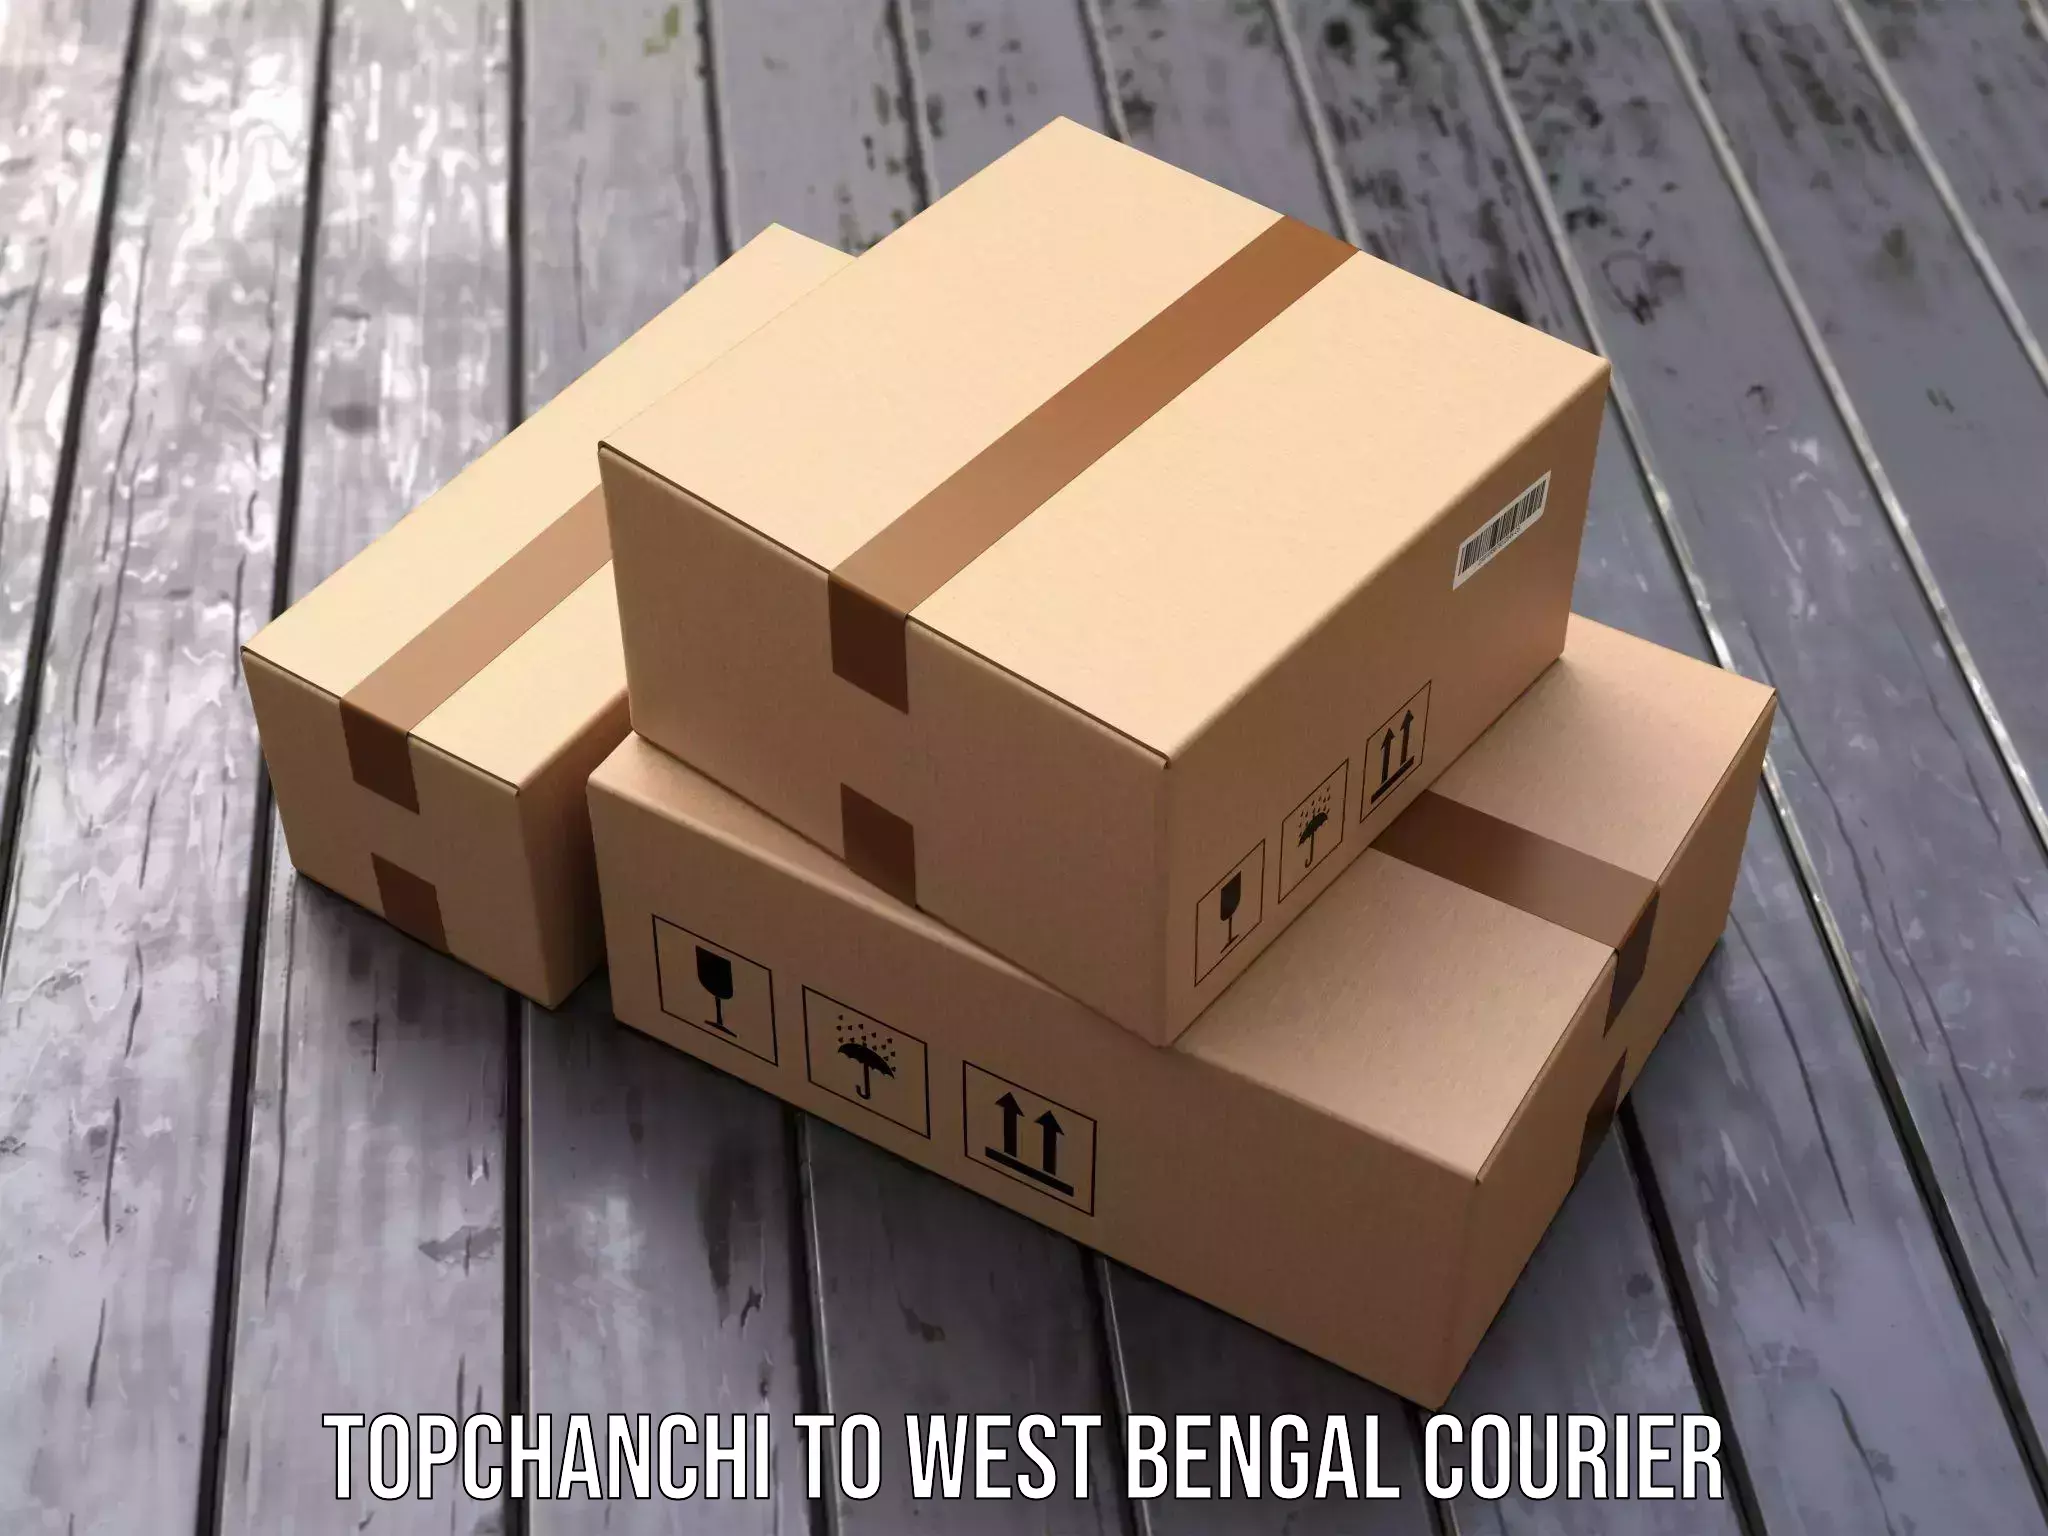 Parcel service for businesses Topchanchi to Bhagabati